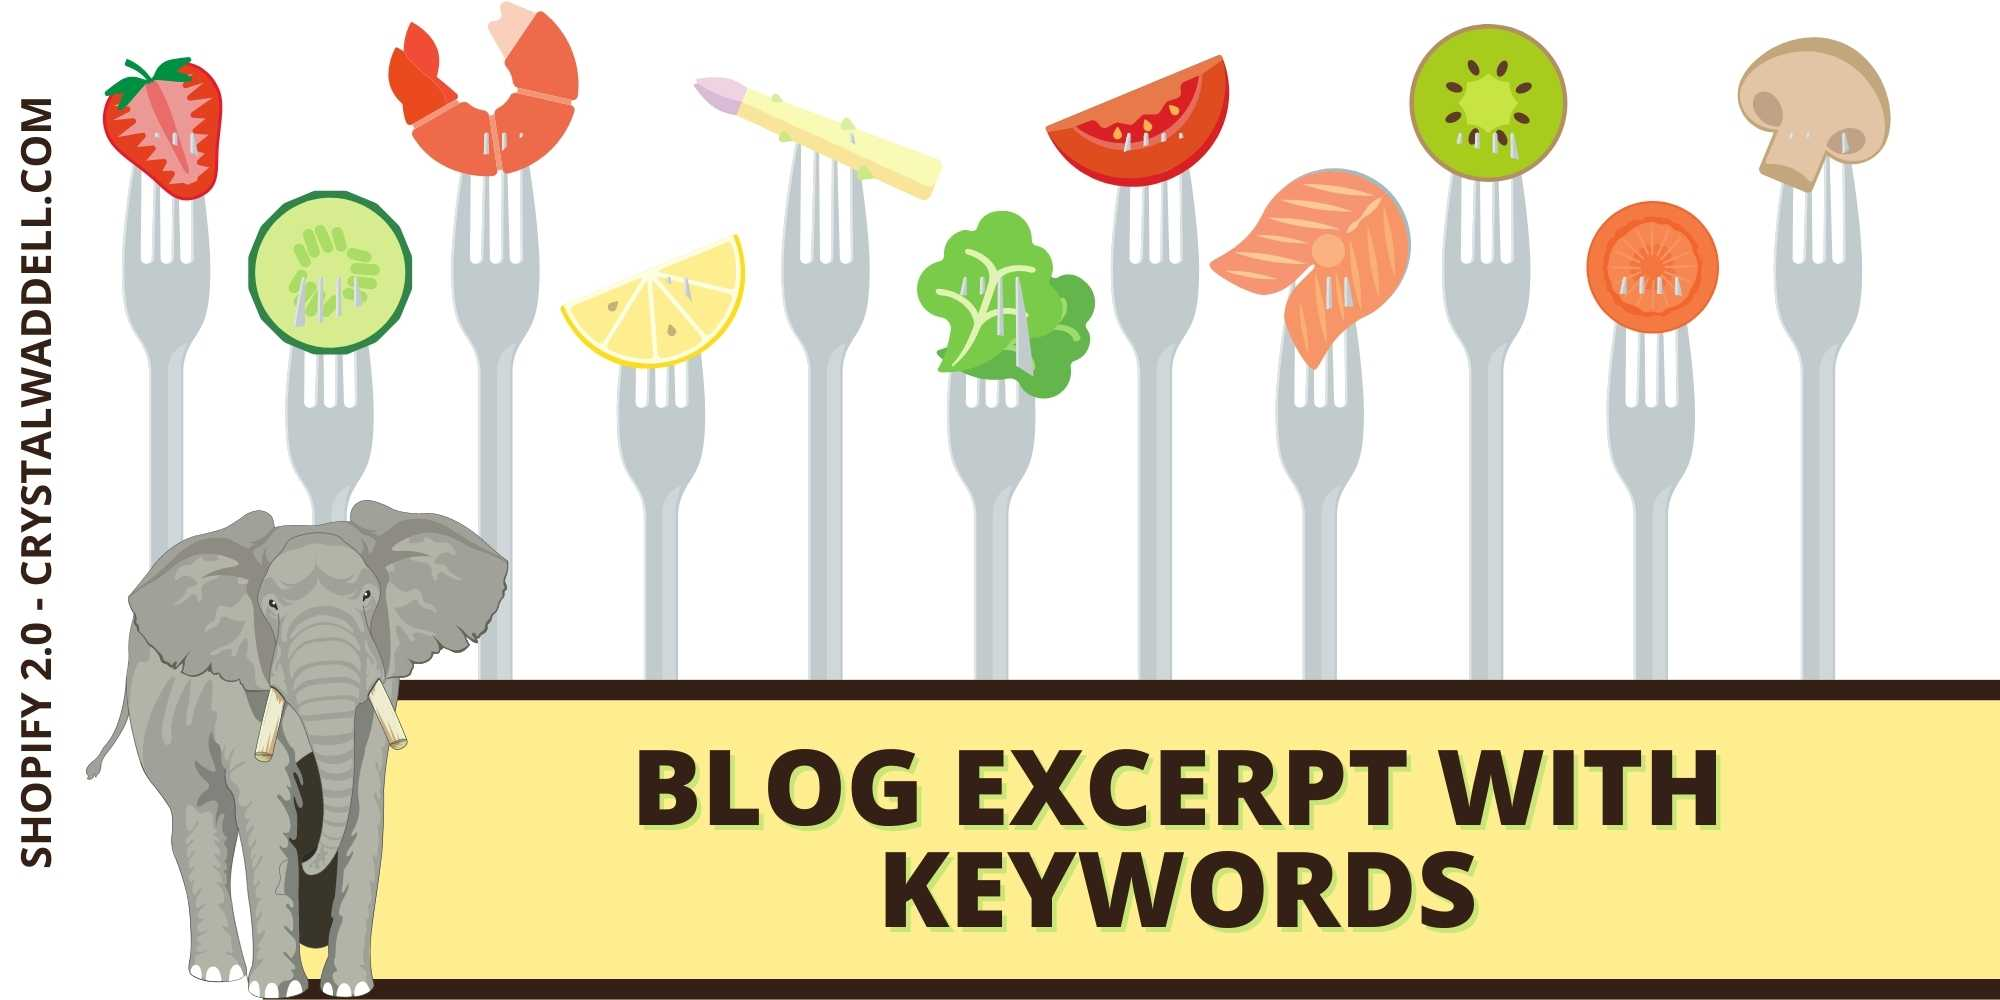 You'll want to summarize your blog in each blog excerpt to avoid duplicate content.